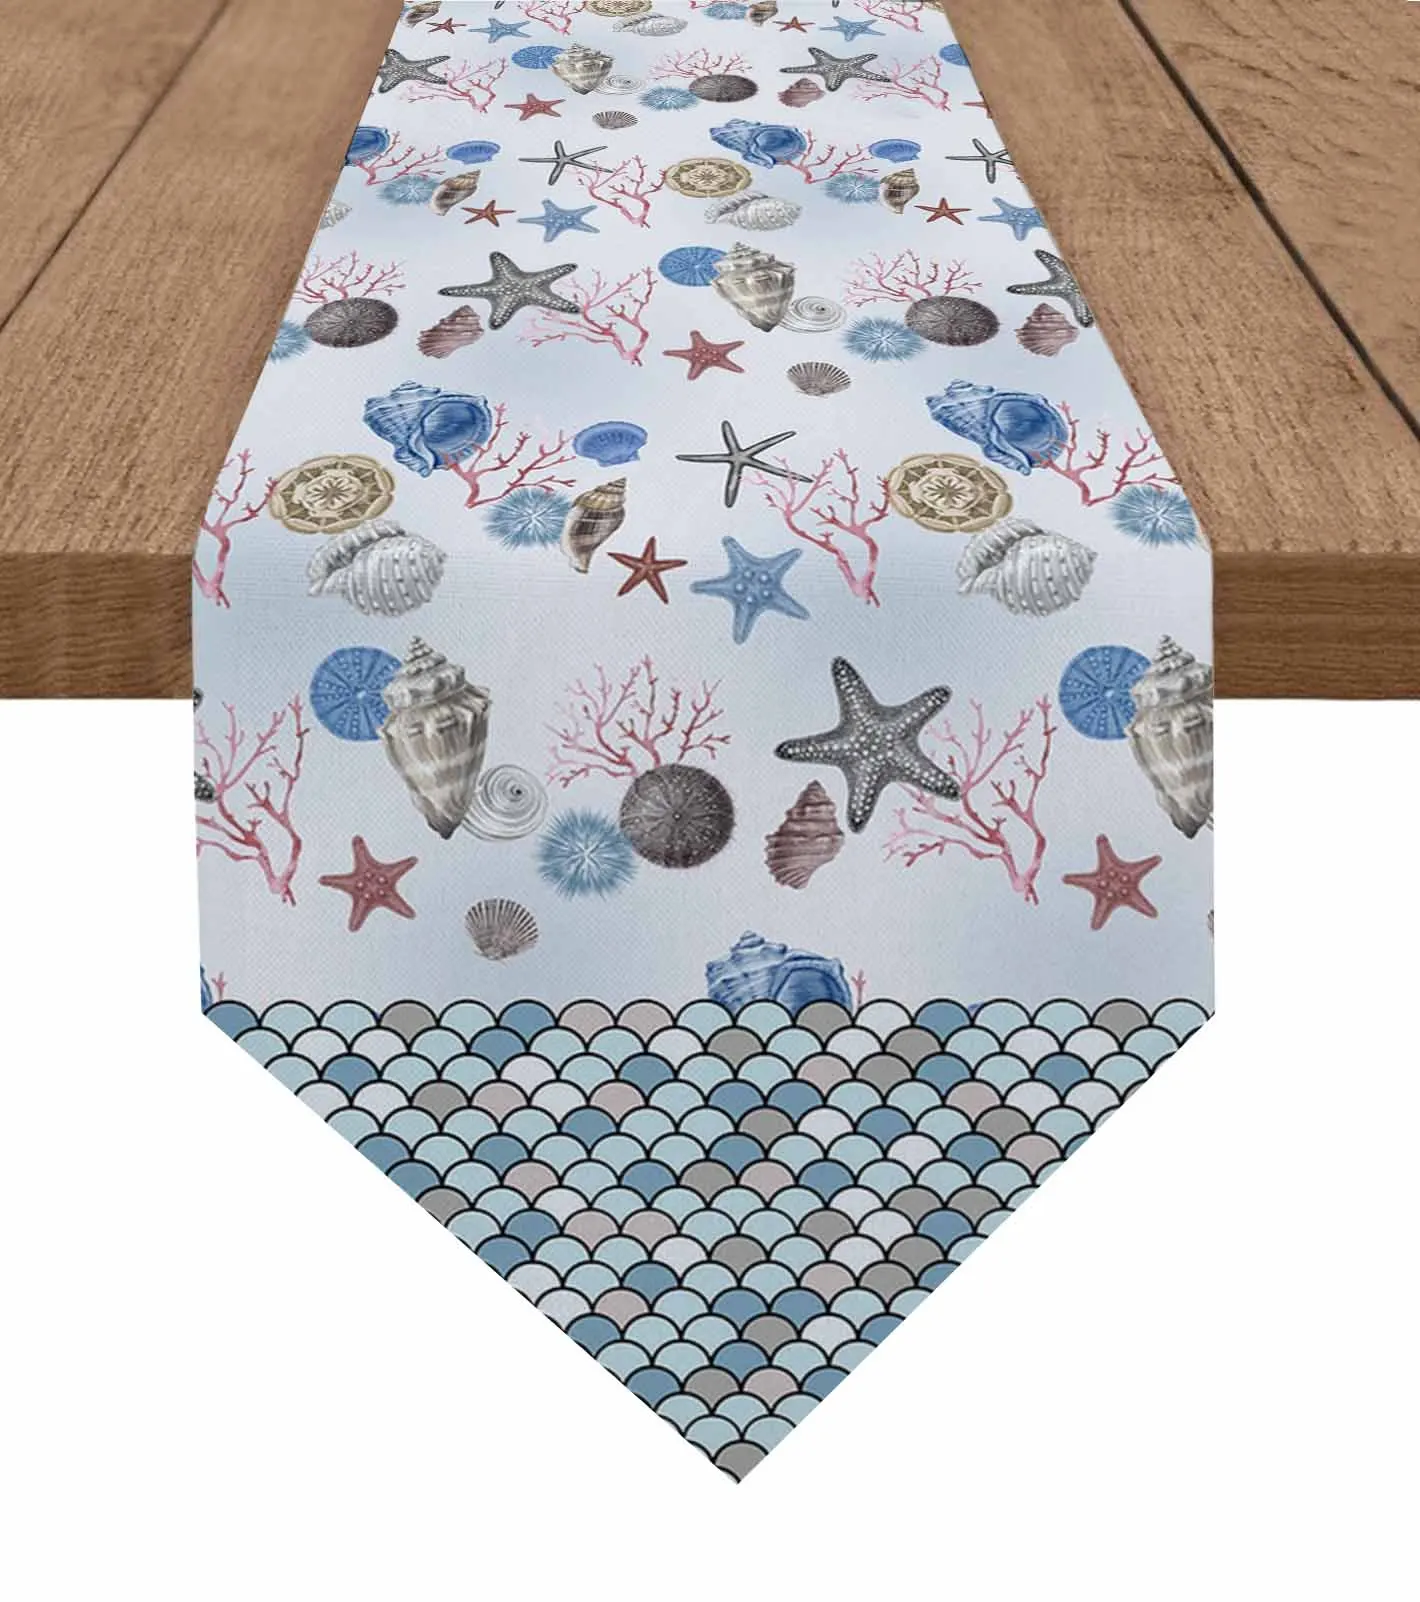 

Ocean Shell Starfish Fish Scales Table Runner Wedding Holiday Party Decoration Tablecloth Summer Kitchen Dining Table Runner